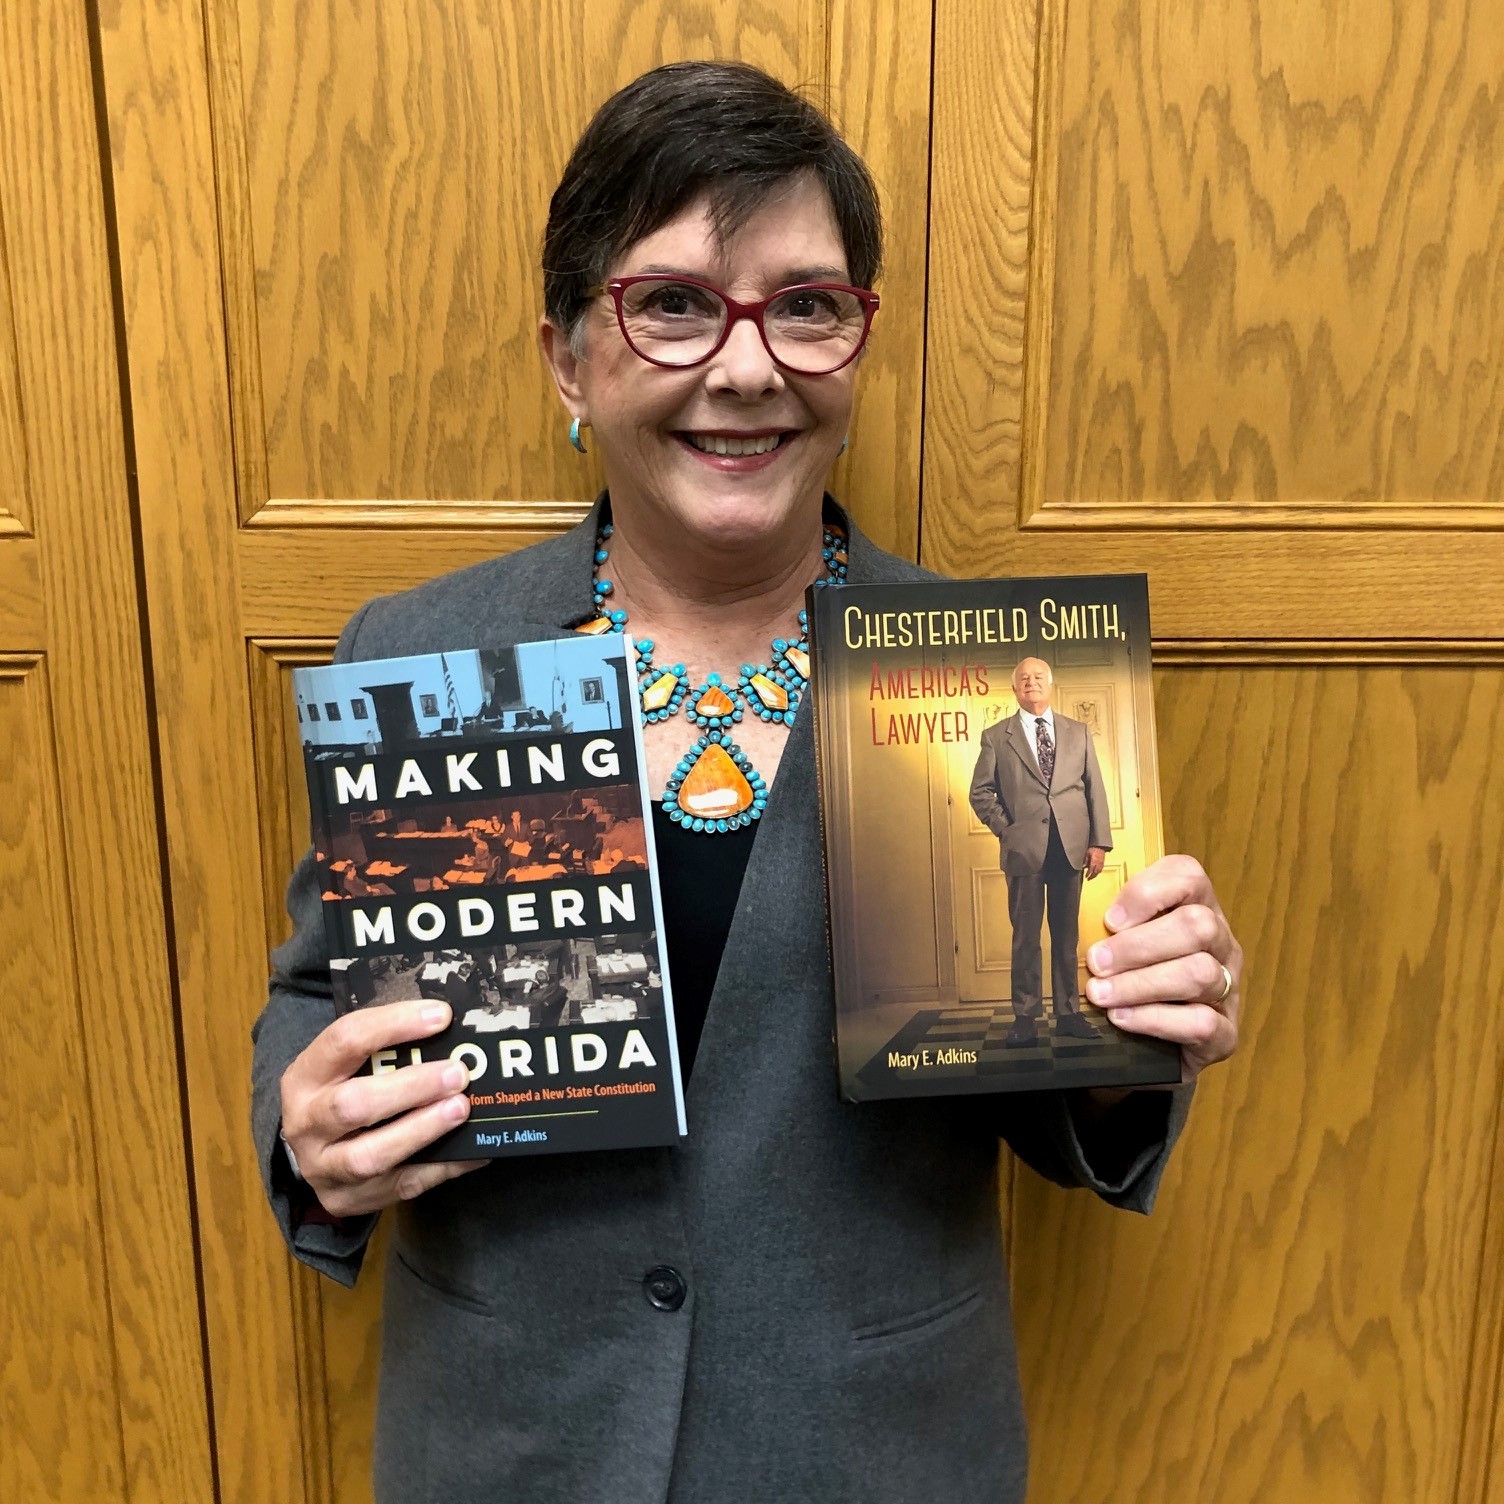 Mary E. Adkins, author of Making Modern Florida and Chesterfield Smith, America's Lawyer, at the University of Florida Smathers Library